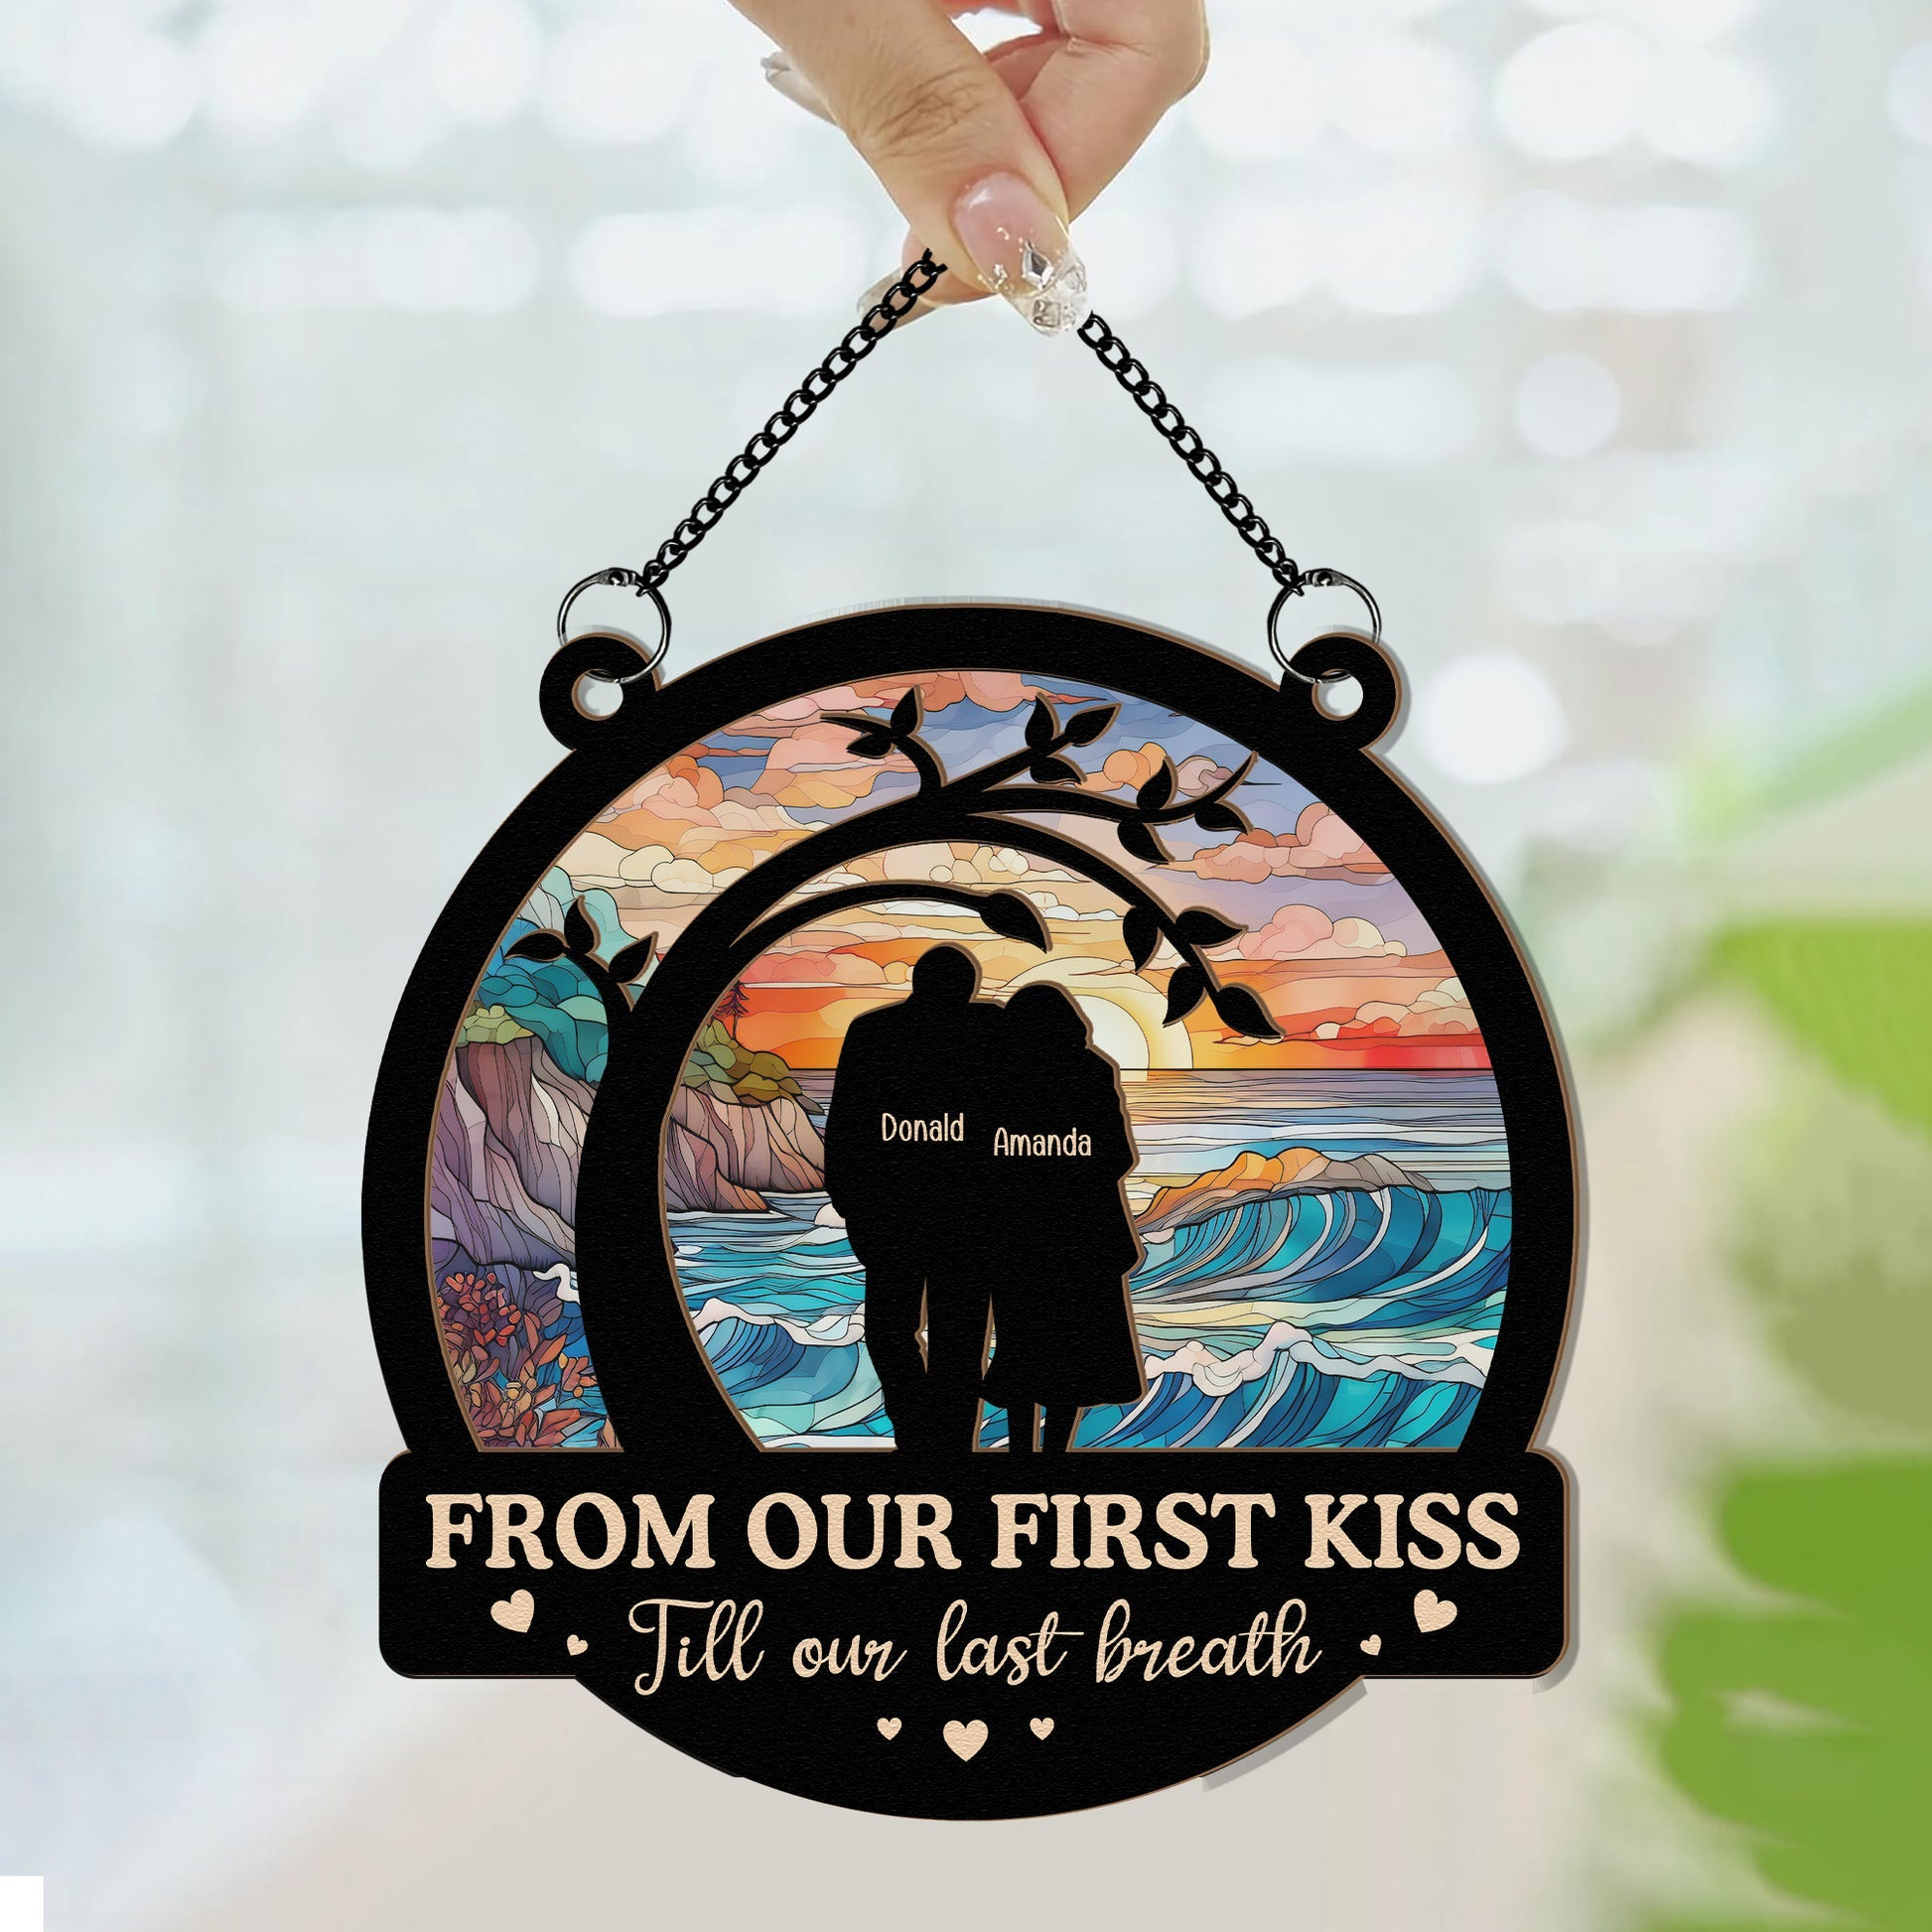 From Our First Kiss Anniversary Gift - Personalized Window Hanging Suncatcher Ornament